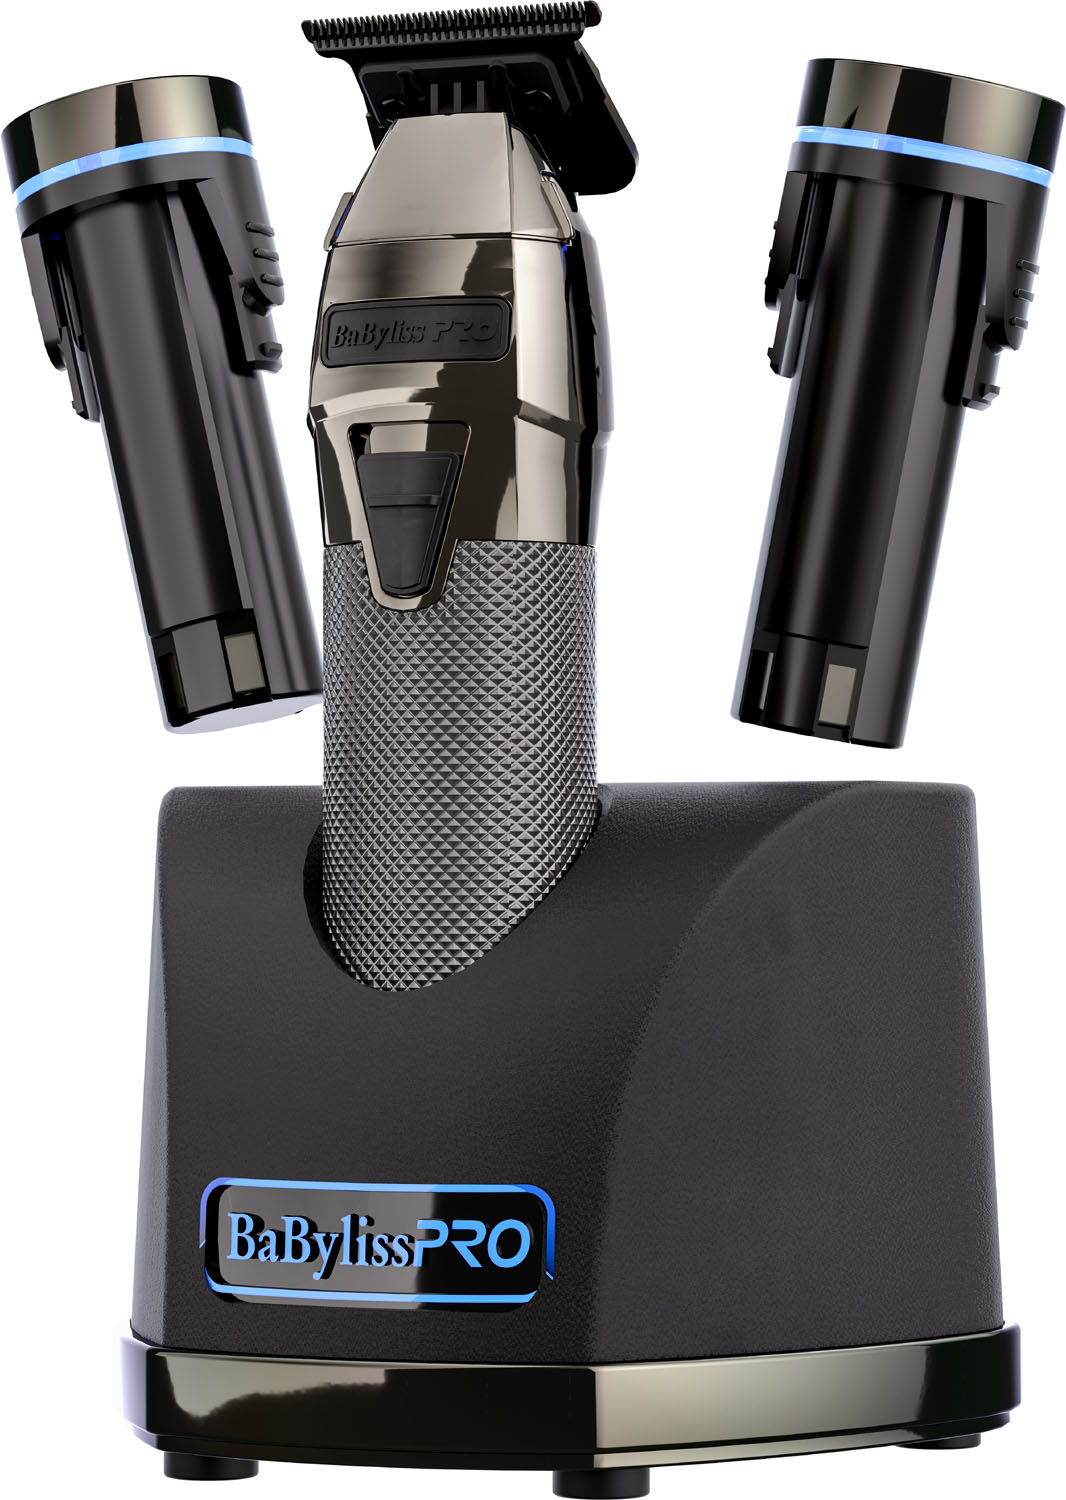  BaByliss PRO 4Artists SnapFX Trimmer 